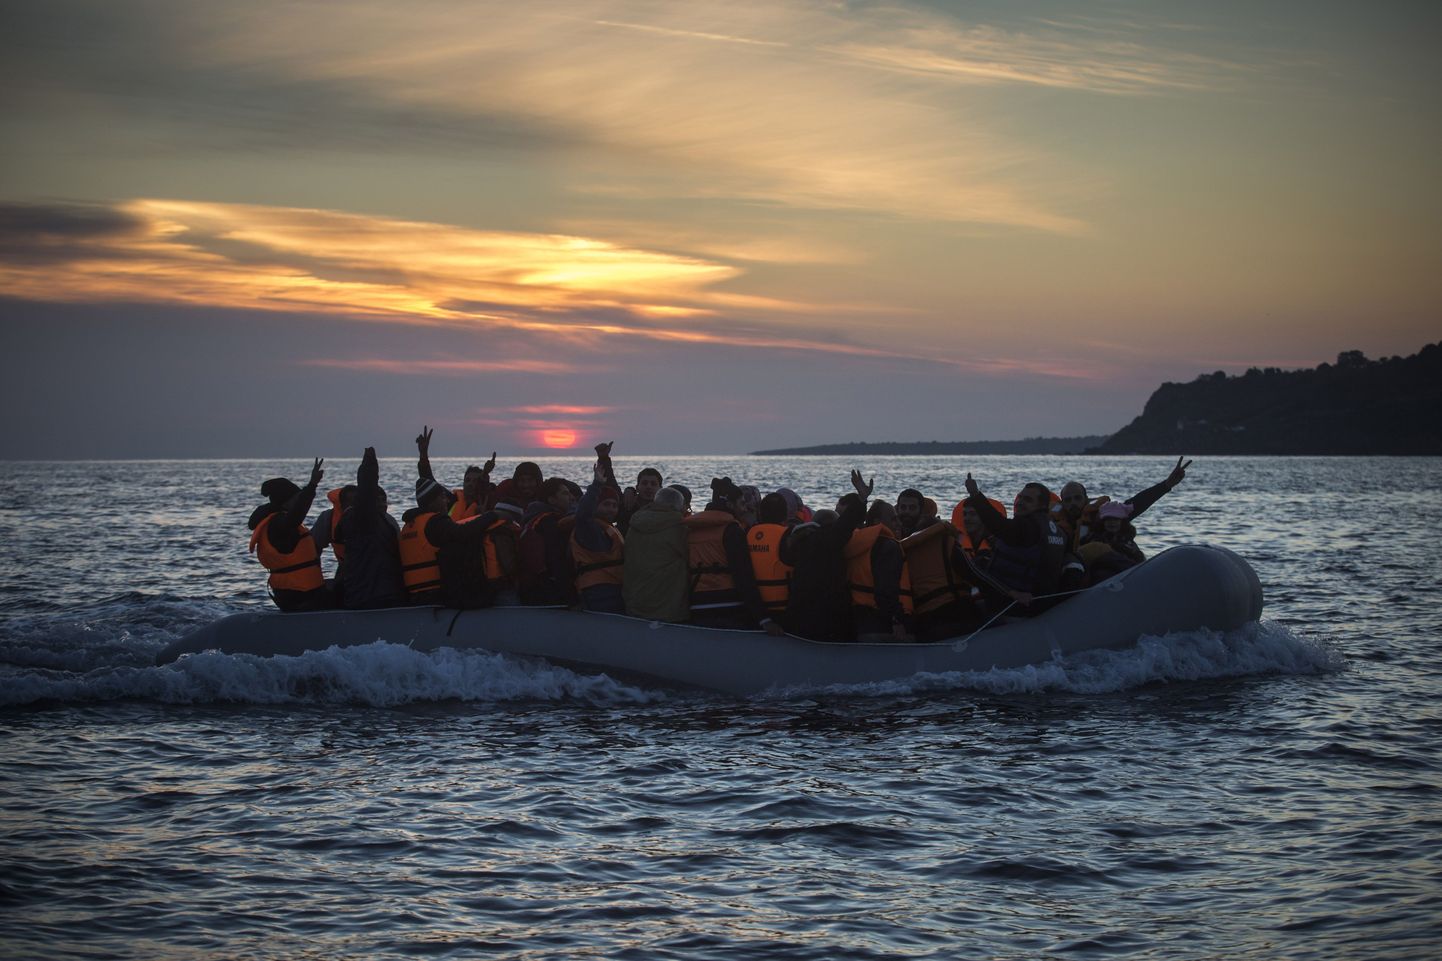 Refugees and migrants calls the attention of a rescue team when approaching the Greek island of Lesbos on a dinghy, after crossing a part of the Aegean sea from Turkey, on Friday, Dec. 25, 2015. The International Organization for Migrants said more than 1 million people have entered Europe earlier this week. Almost all came by sea, while 3,692 drowned in the attempt.(AP Photo/Santi Palacios)